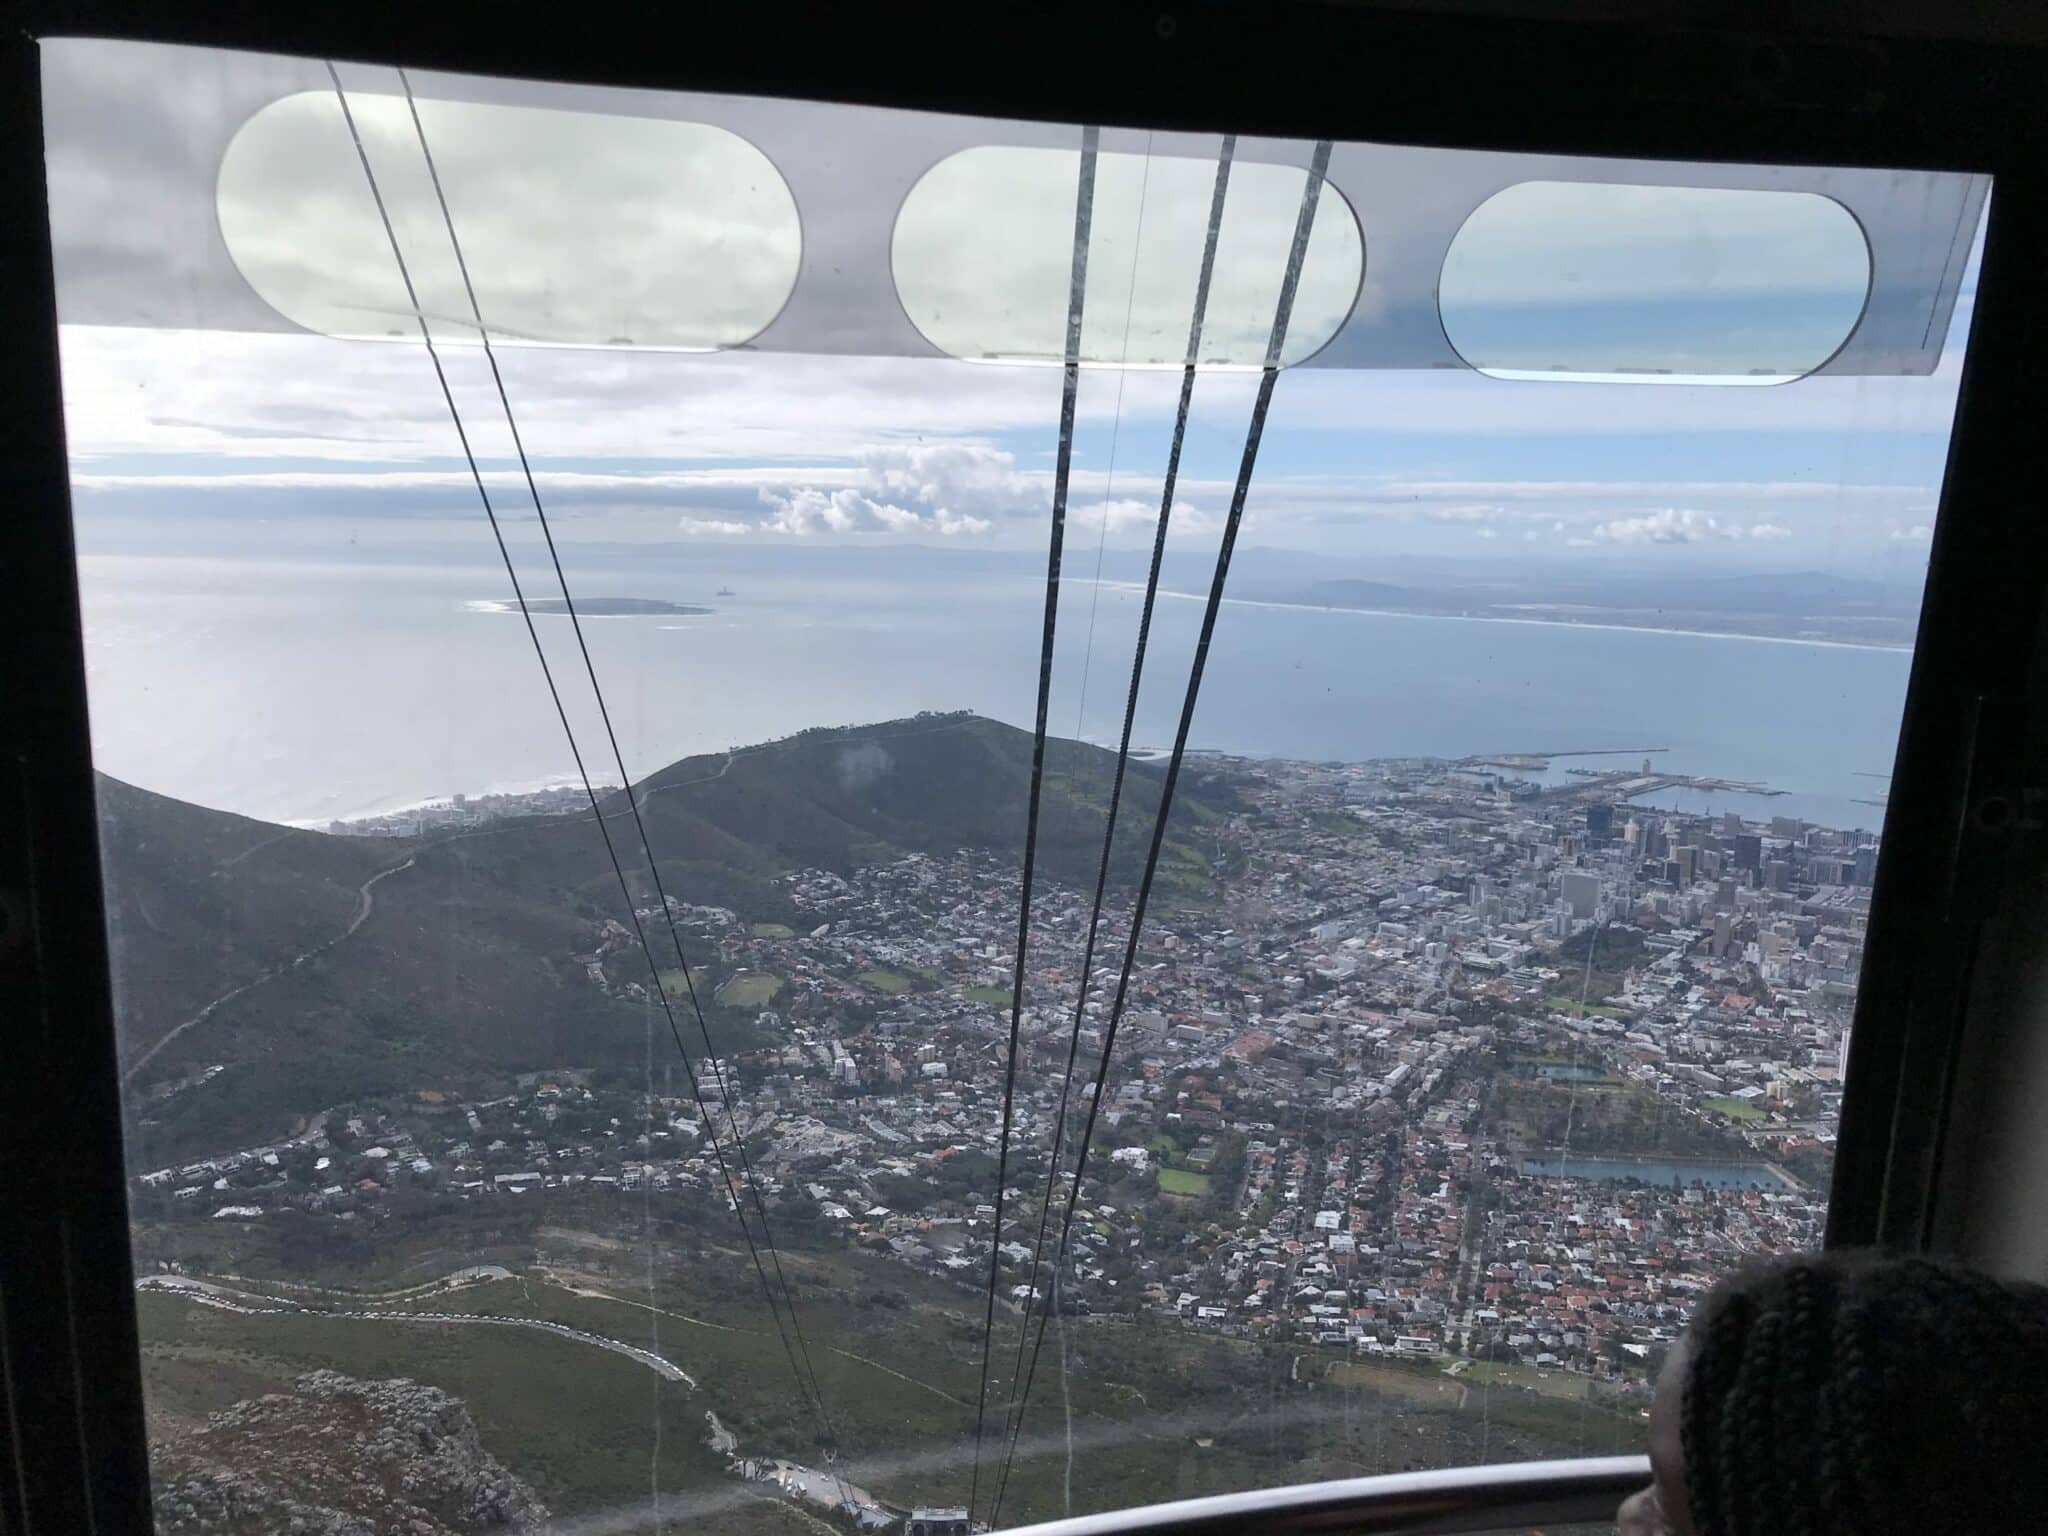 Going down on the cable car